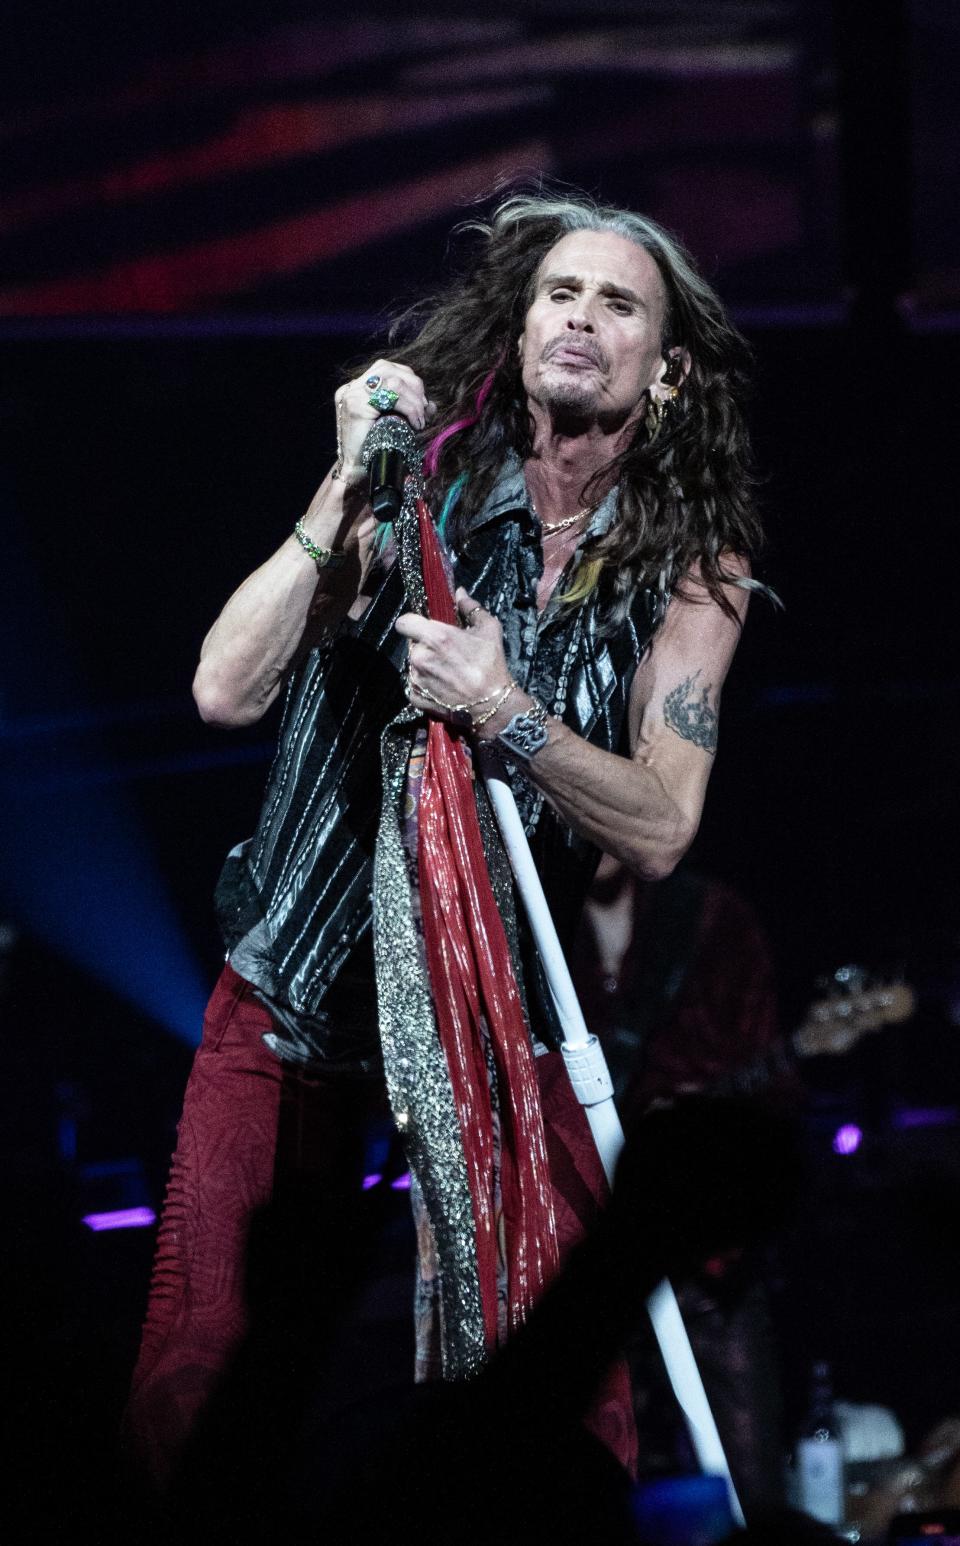 Steven Tyler has been accused of sexual assault for the second time in less than a year by a former teen model who claims he mauled and groped her.